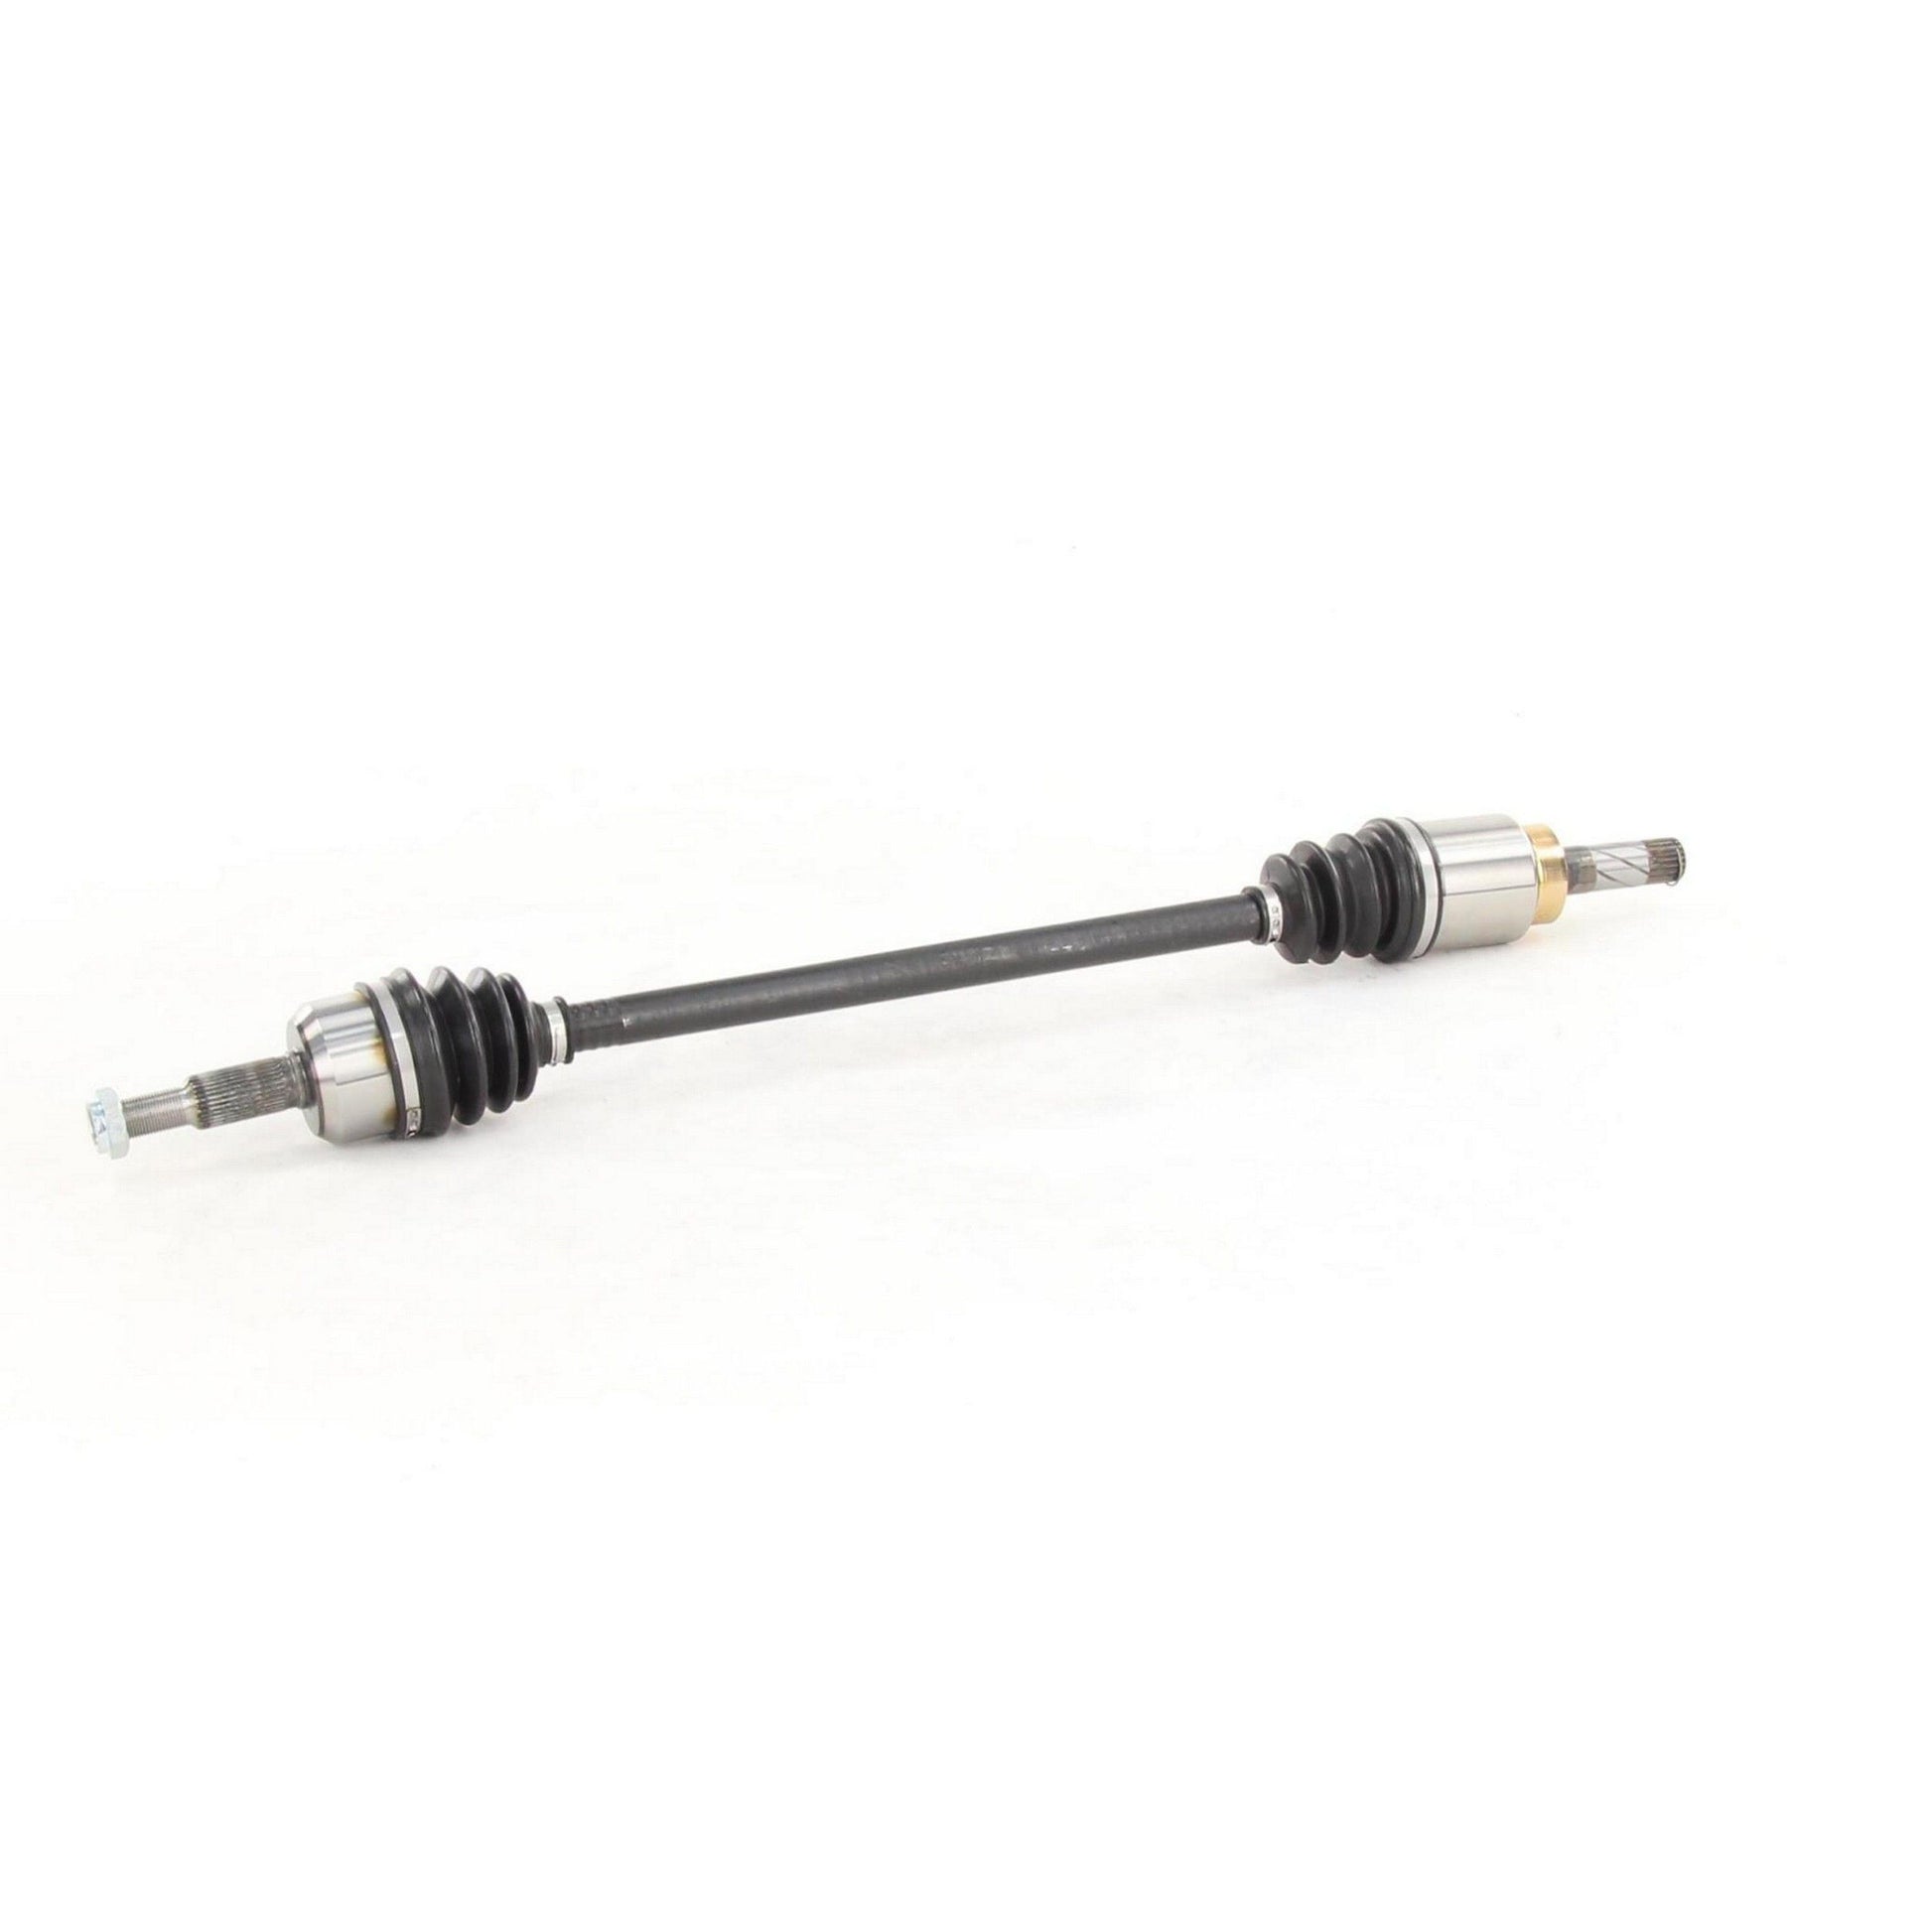 Left View of Rear Right CV Axle Shaft TRAKMOTIVE GM-8391